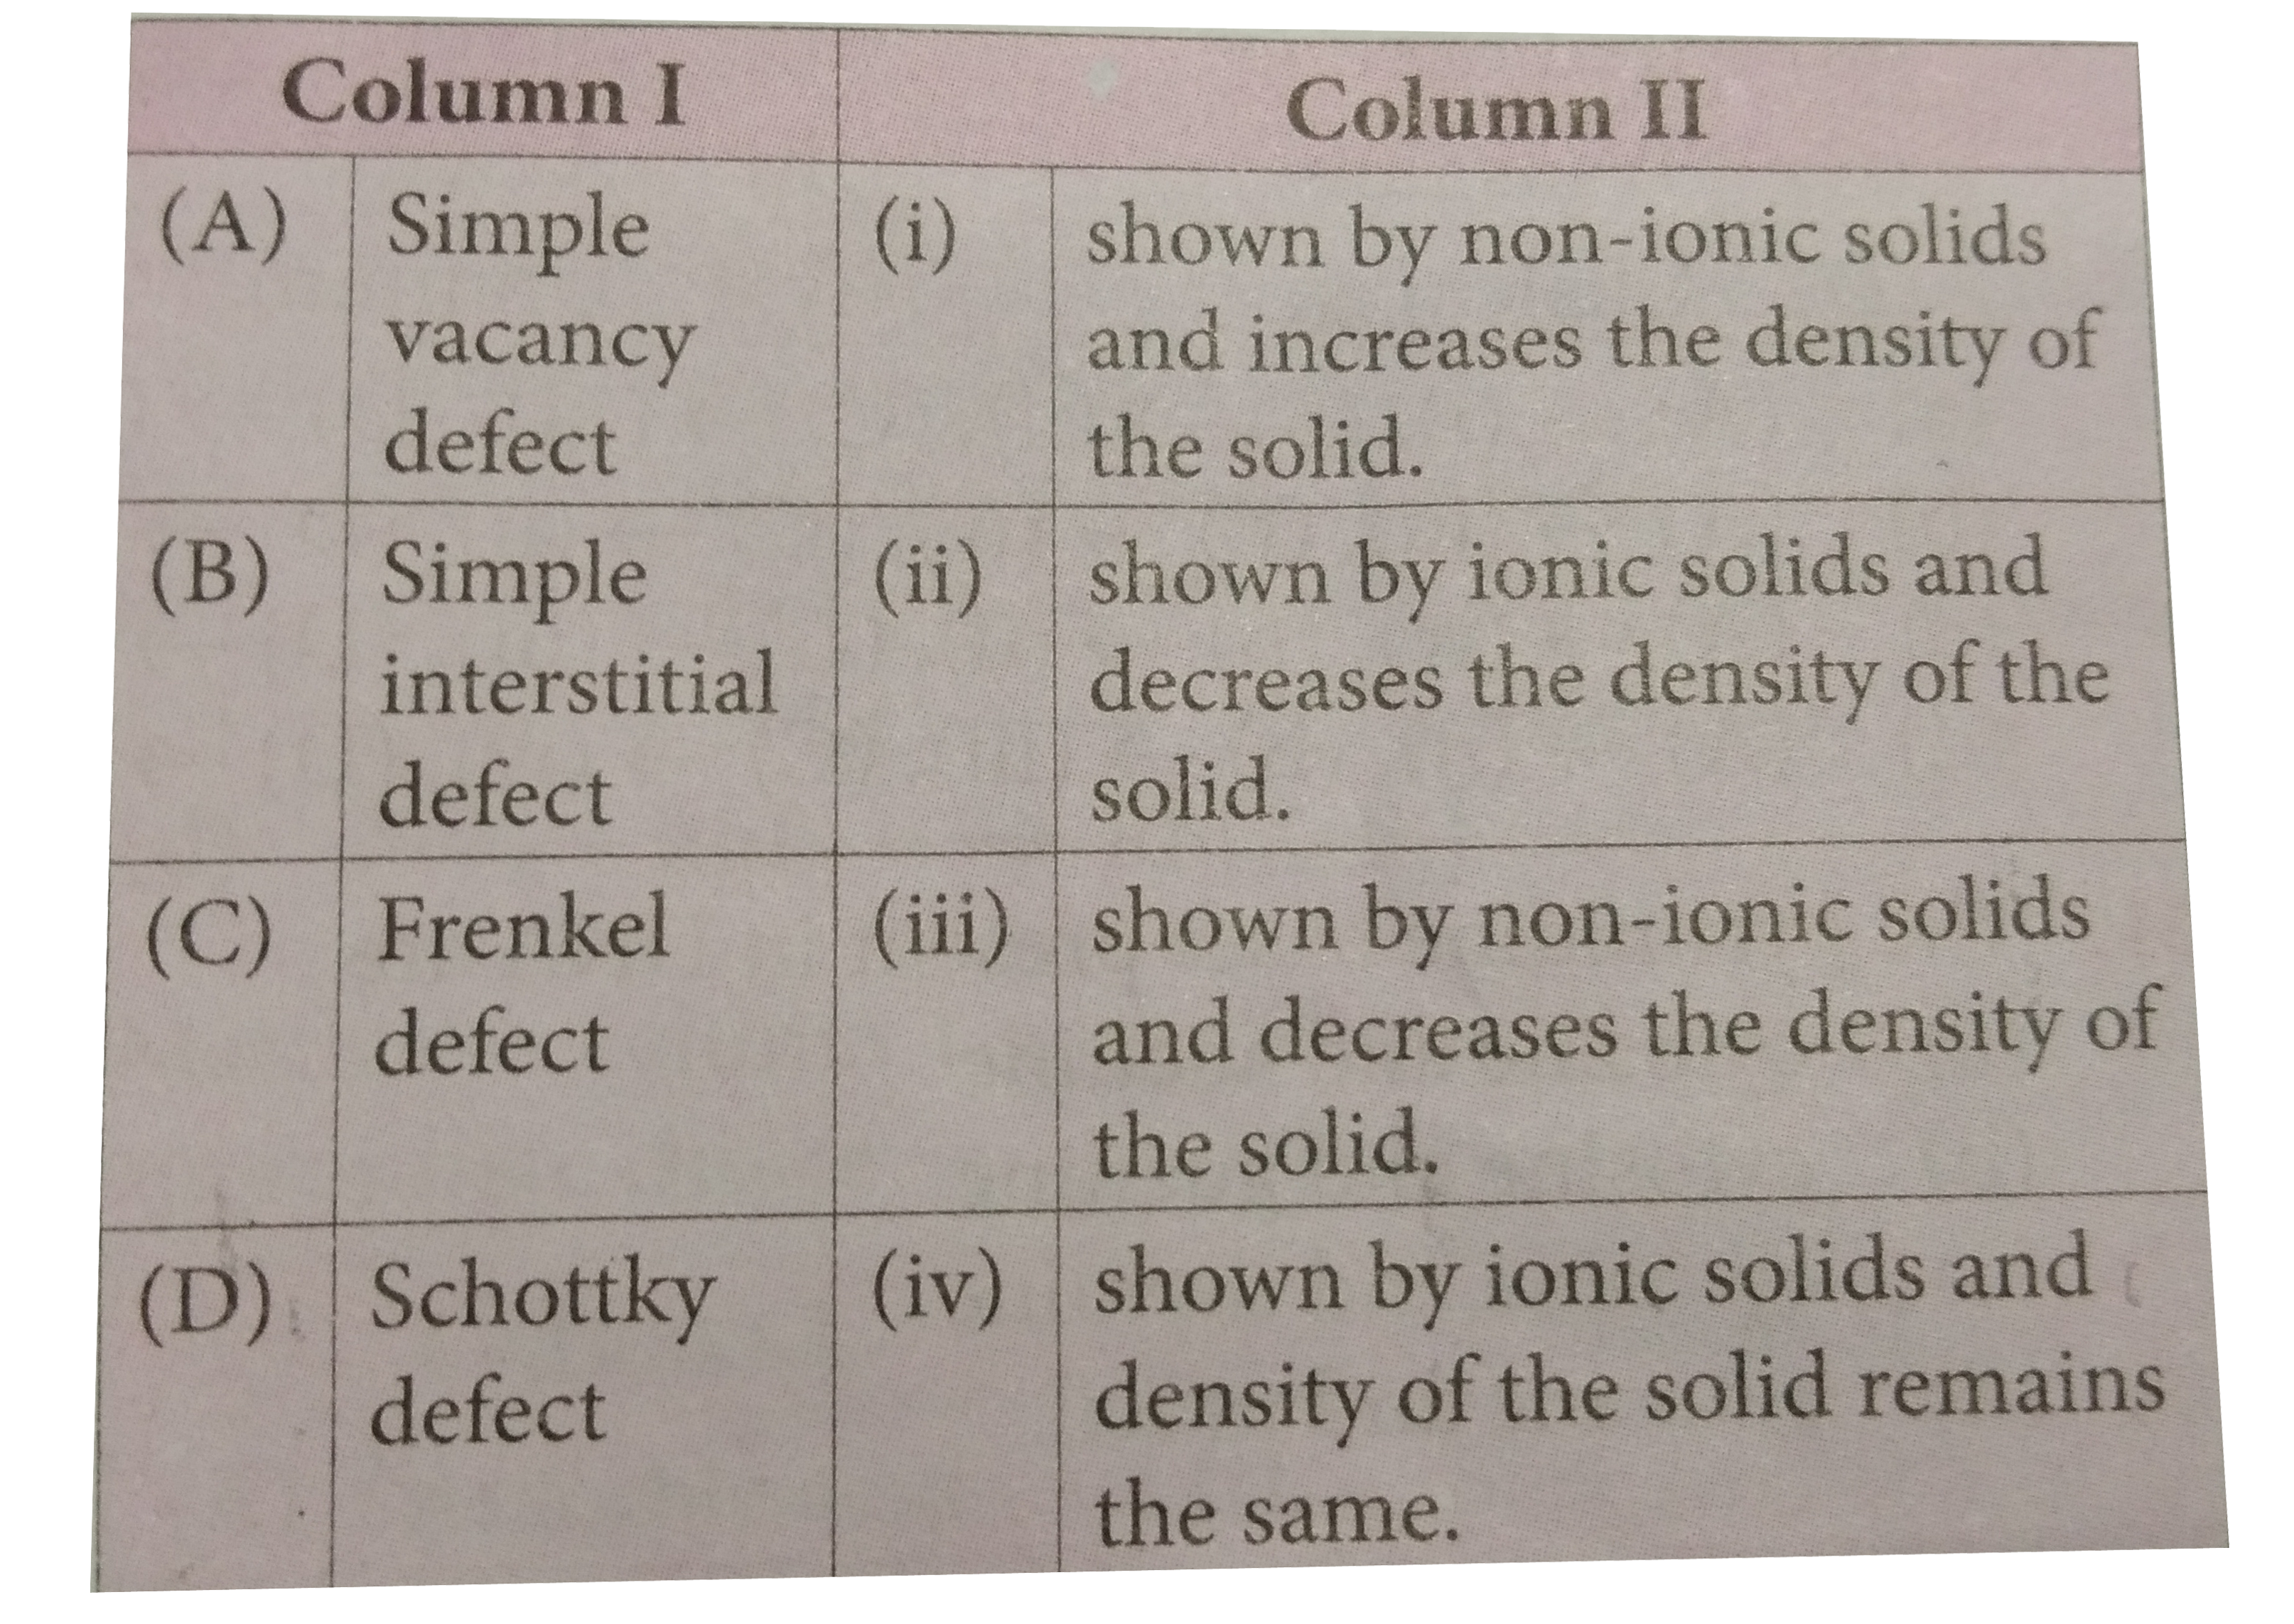 Match the defects gives in column I with  statements given in column II and mark the appropriate choice.